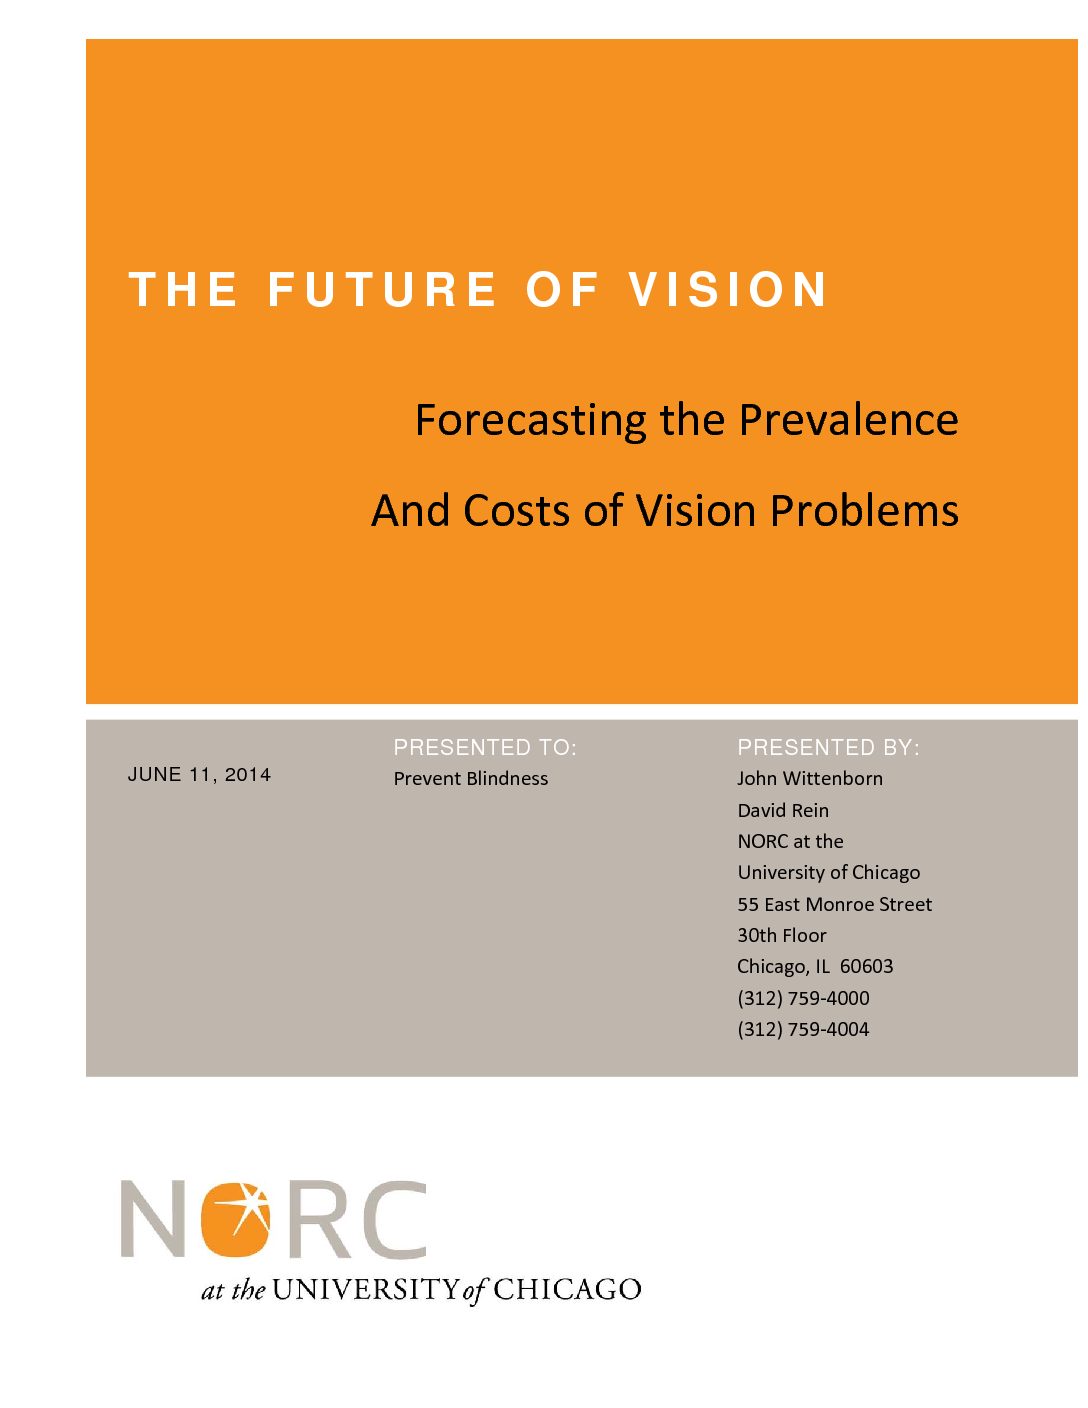 The Future of Vision